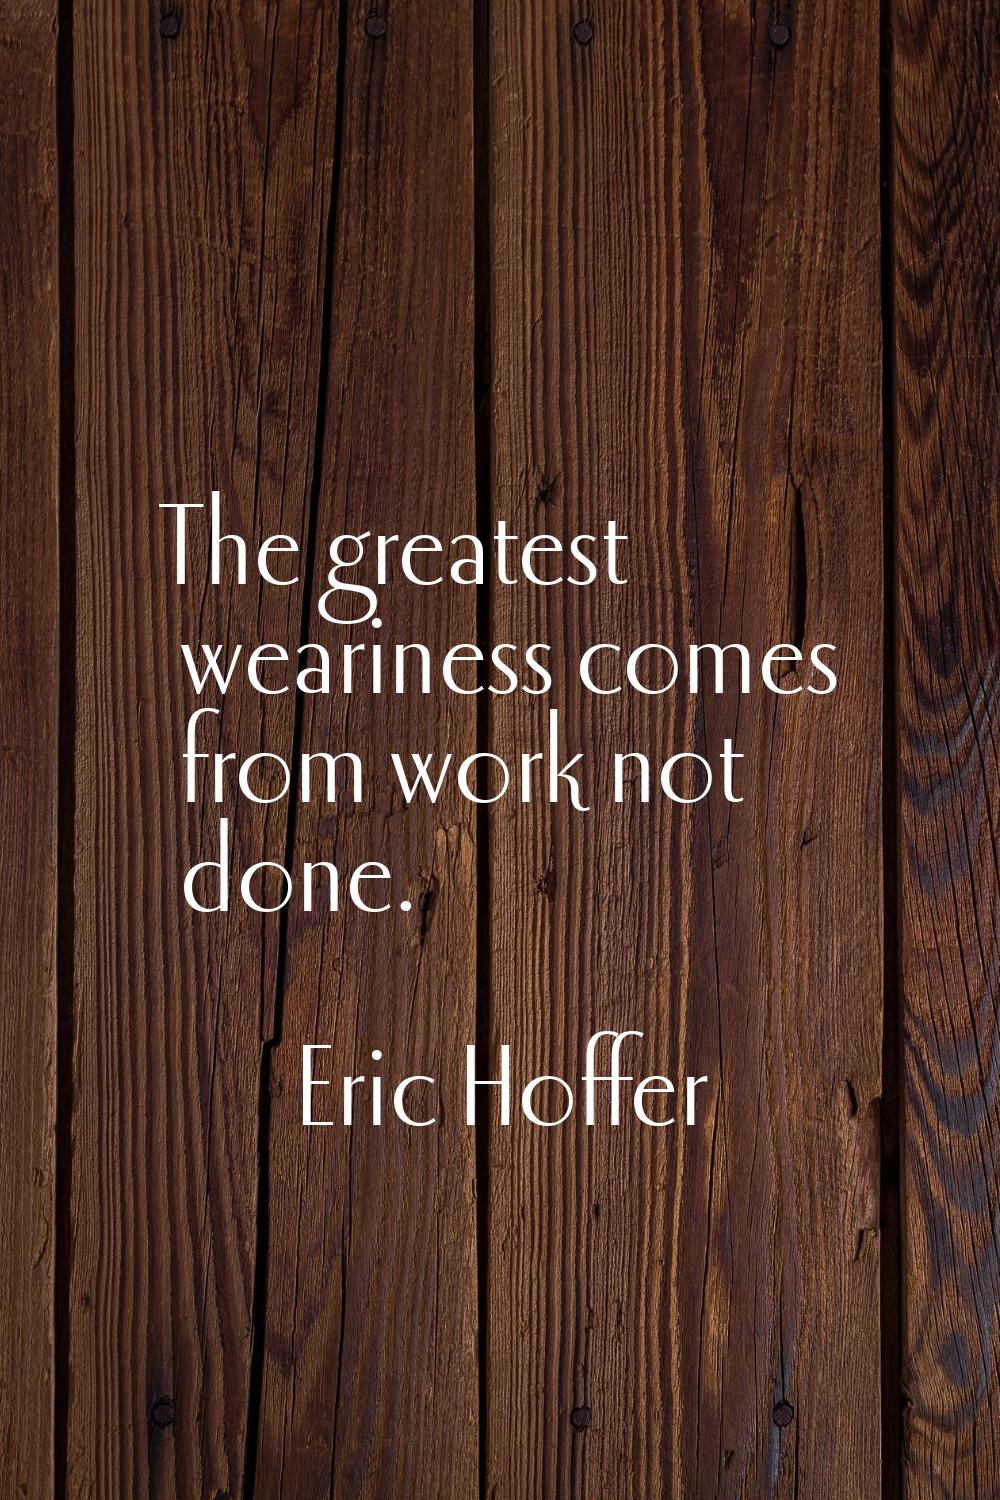 The greatest weariness comes from work not done.